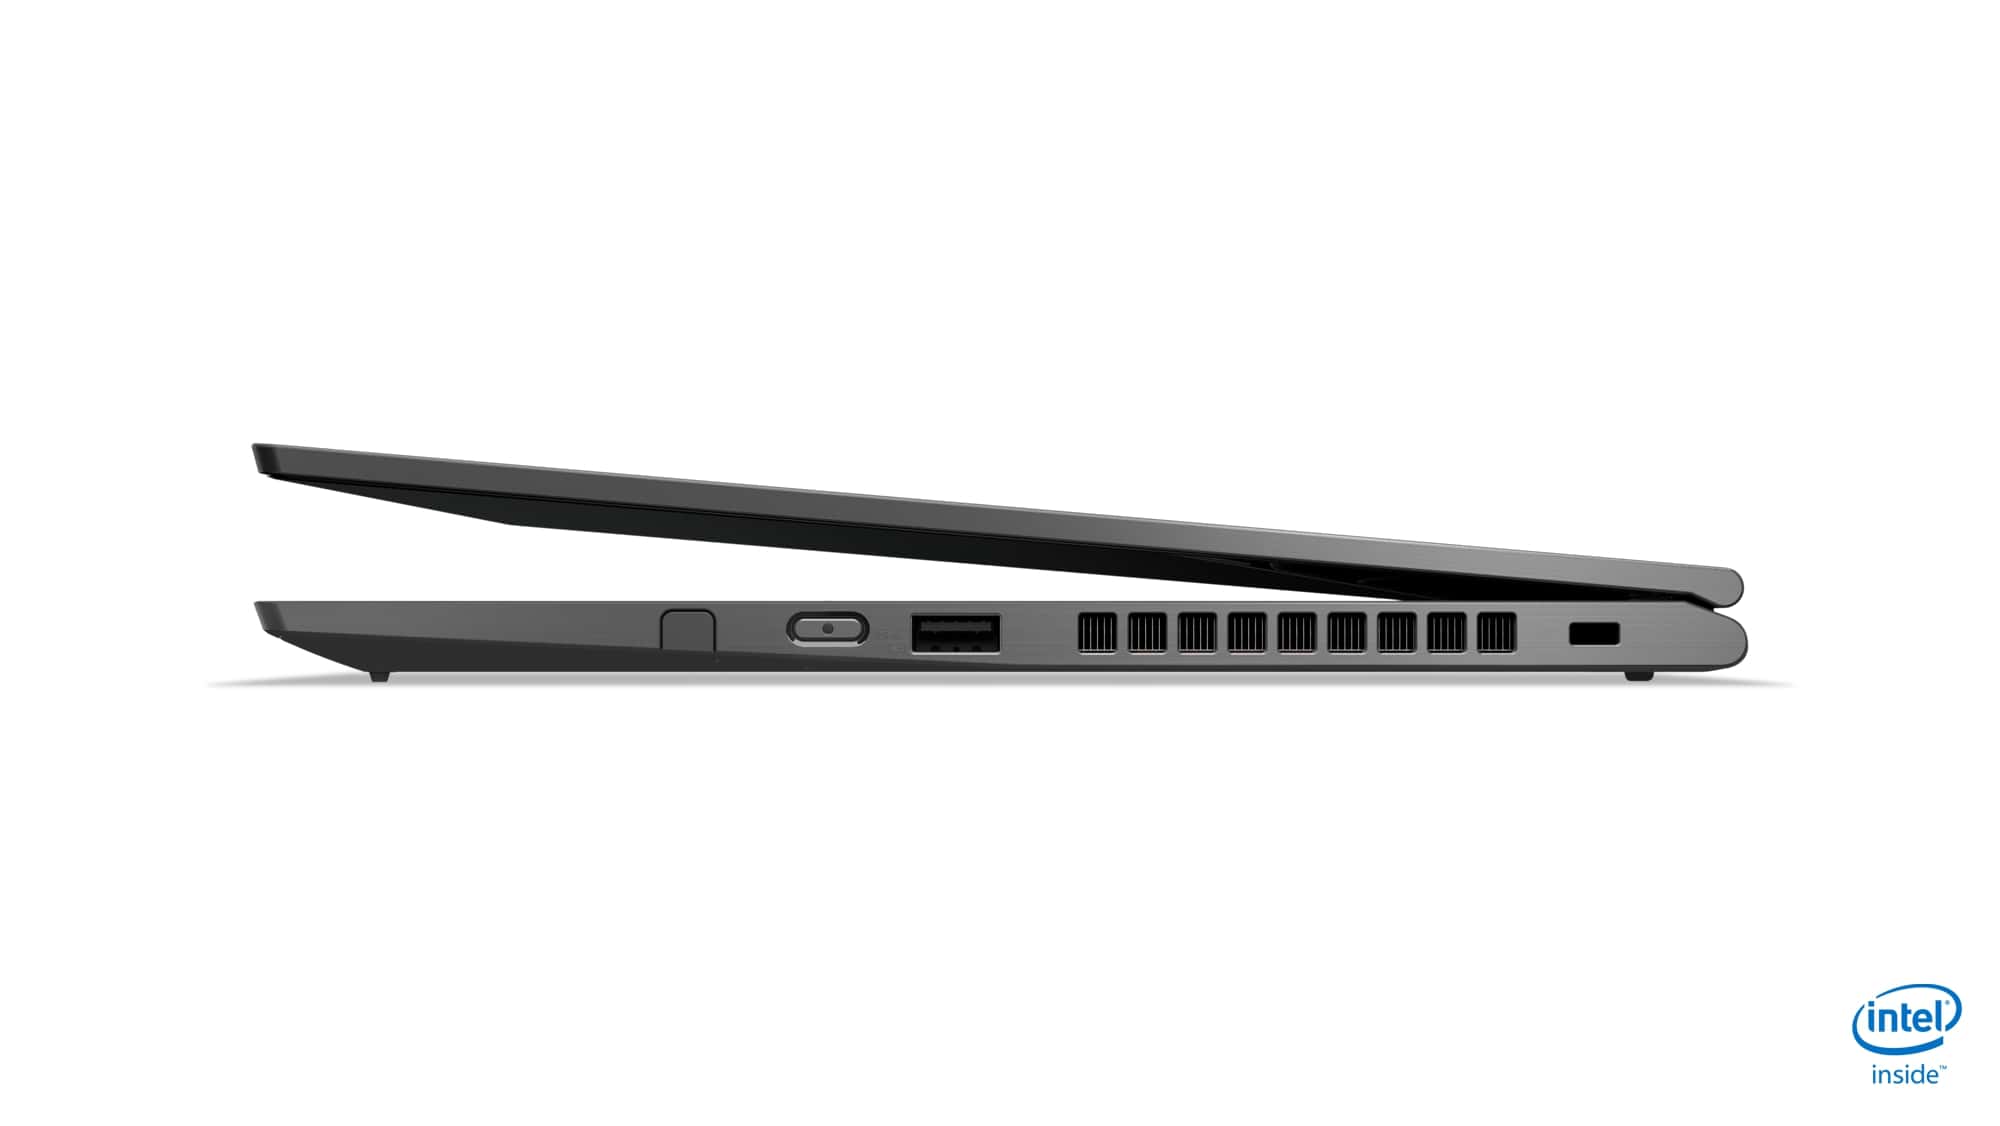 lenovo annouces new thinkpads with 10th gen cometlake 07 x1 yoga hero right screen open